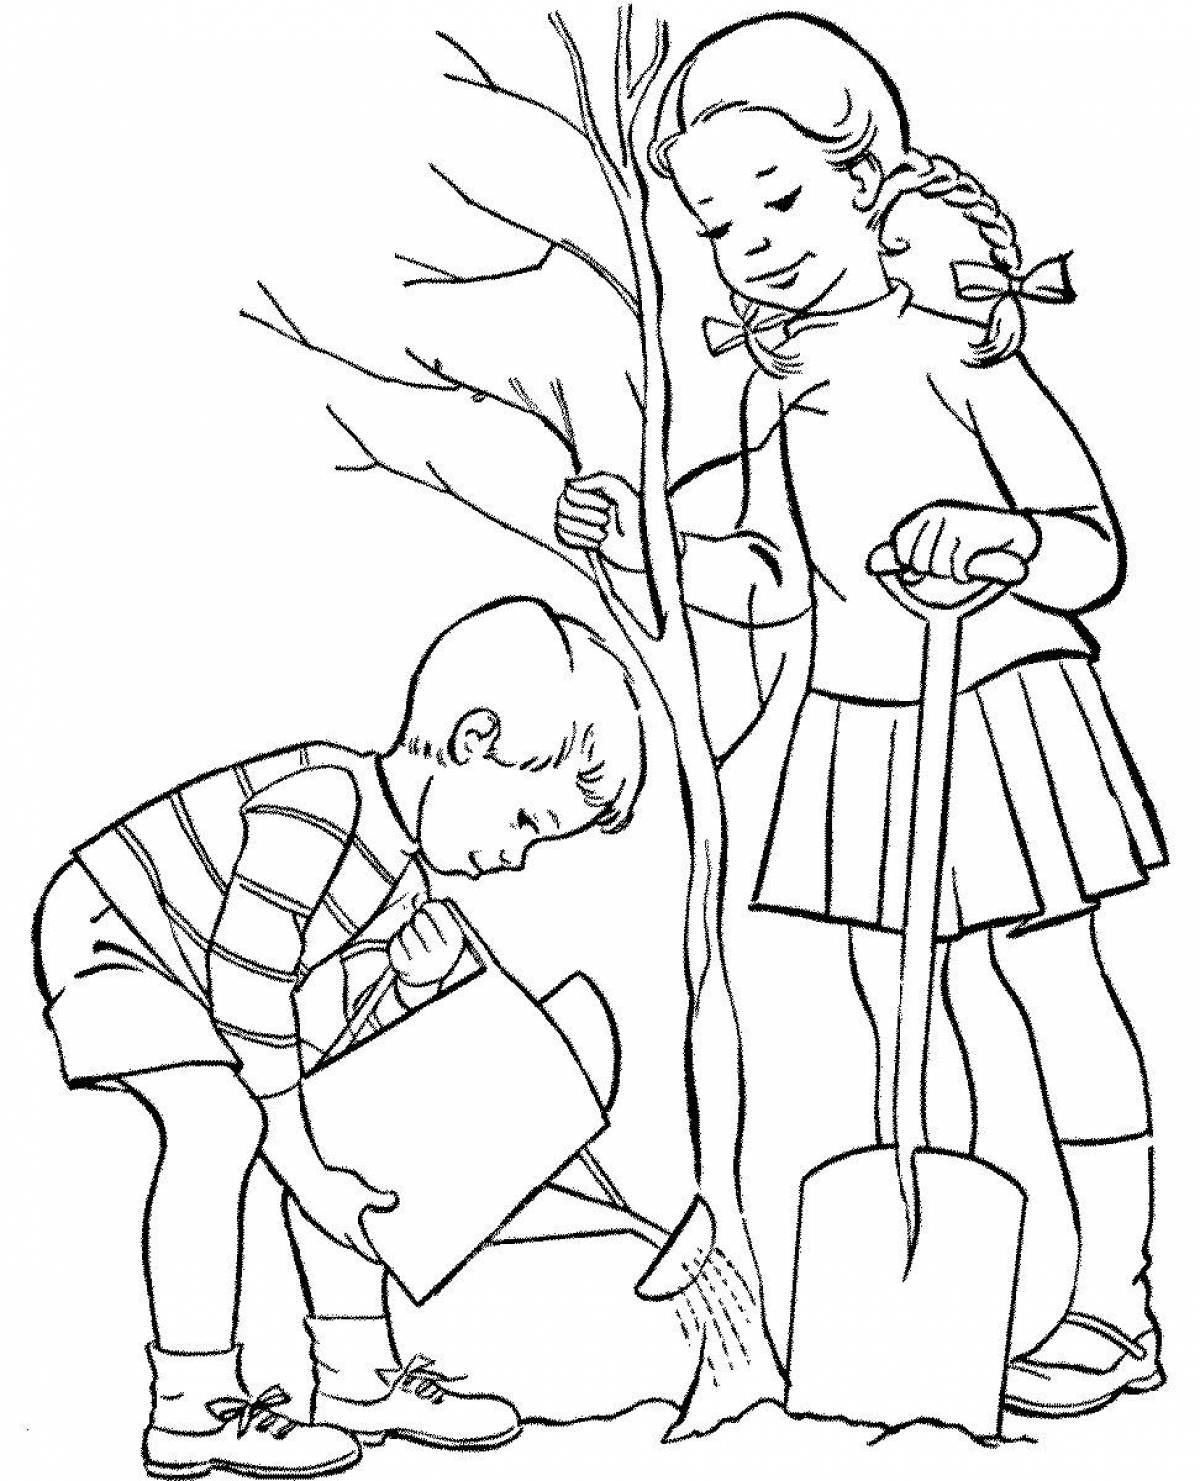 Girl and boy planting a tree